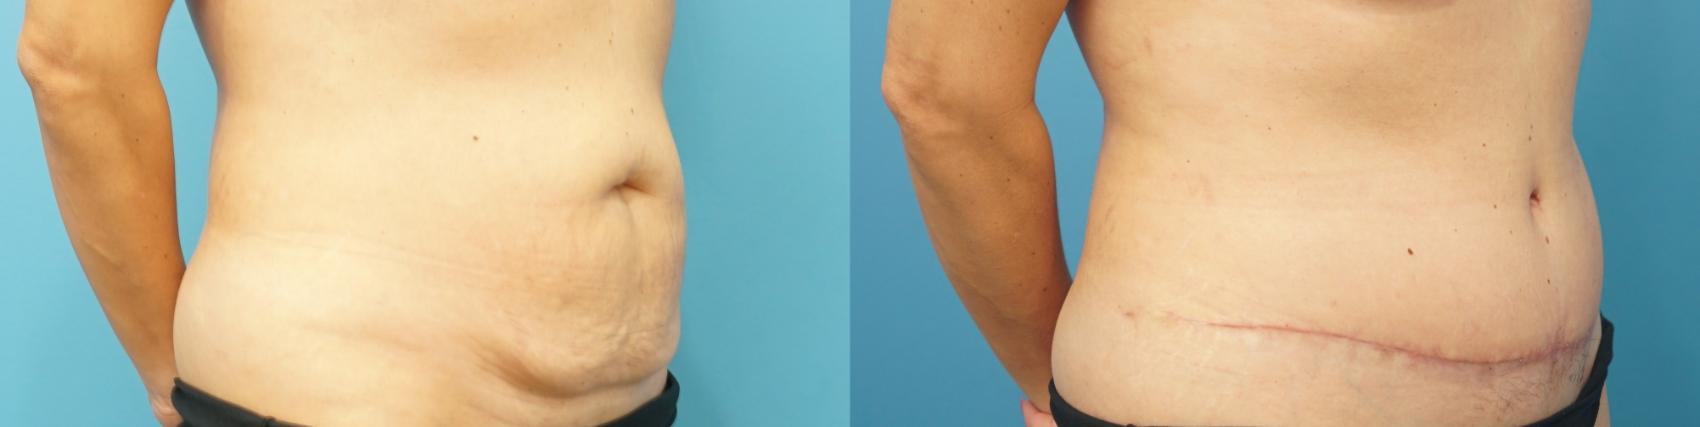 Before & After Abdominoplasty/Tummy Tuck Case 281 Right Oblique View in Northbrook, IL